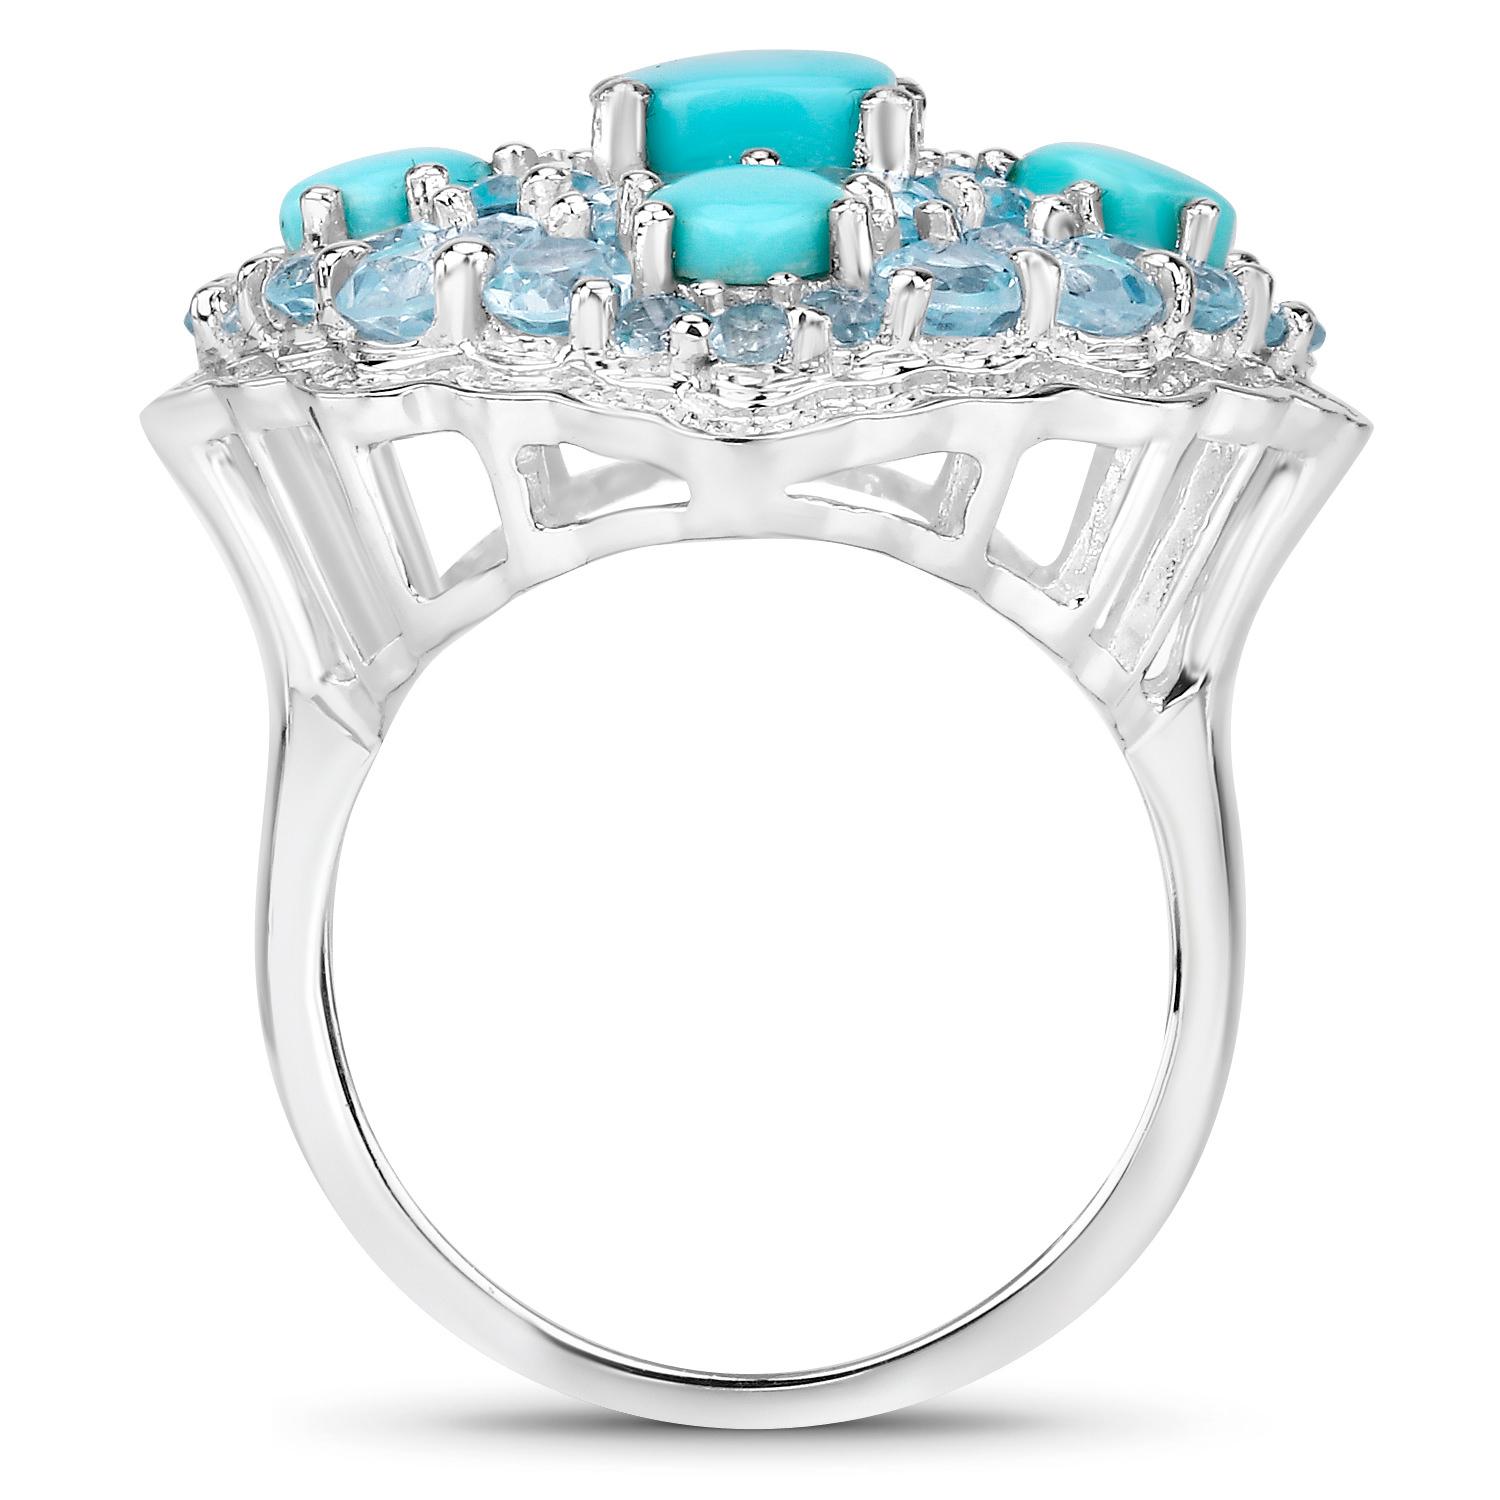 Blue Cocktail Ring Turquoise Blue Topaz 6.2 Carats In Excellent Condition For Sale In Laguna Niguel, CA